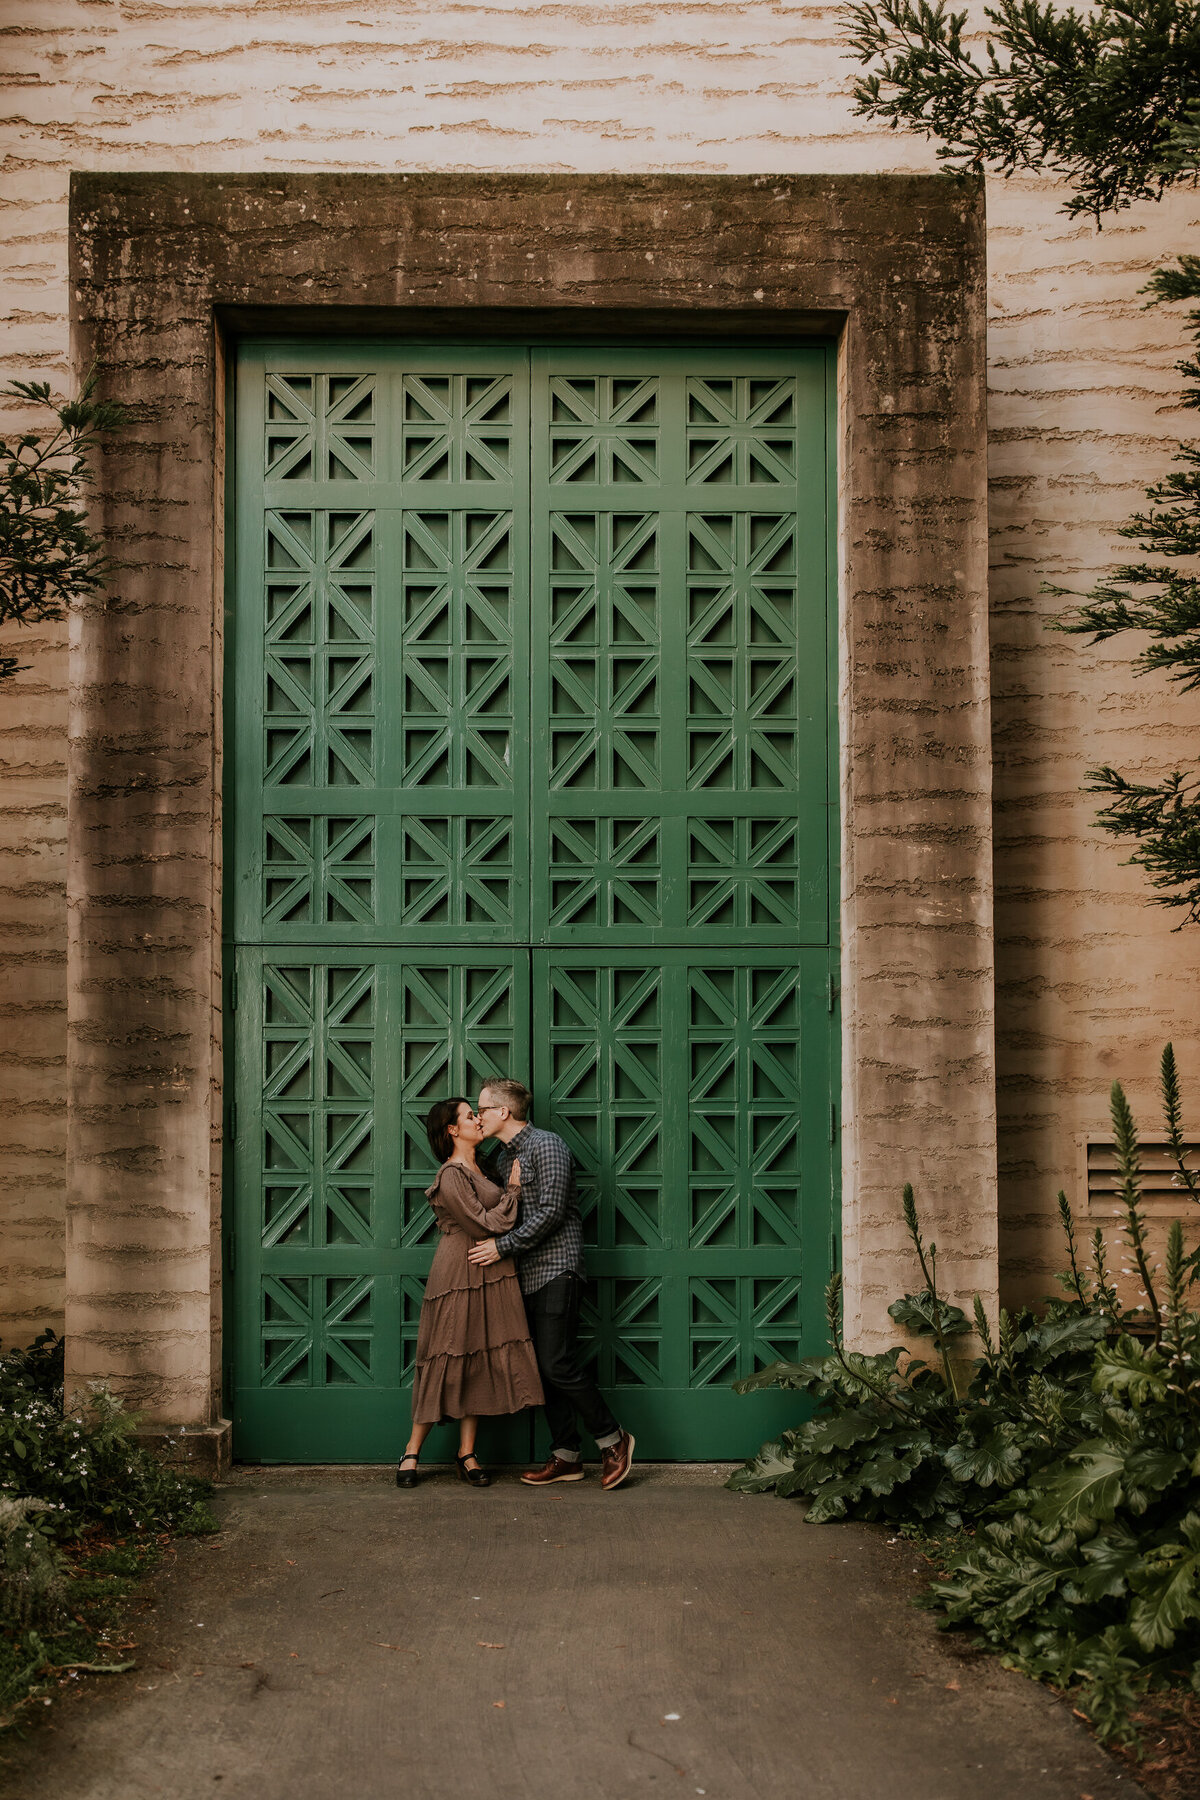 Palace of fine arts maternity photography session with couple kissing